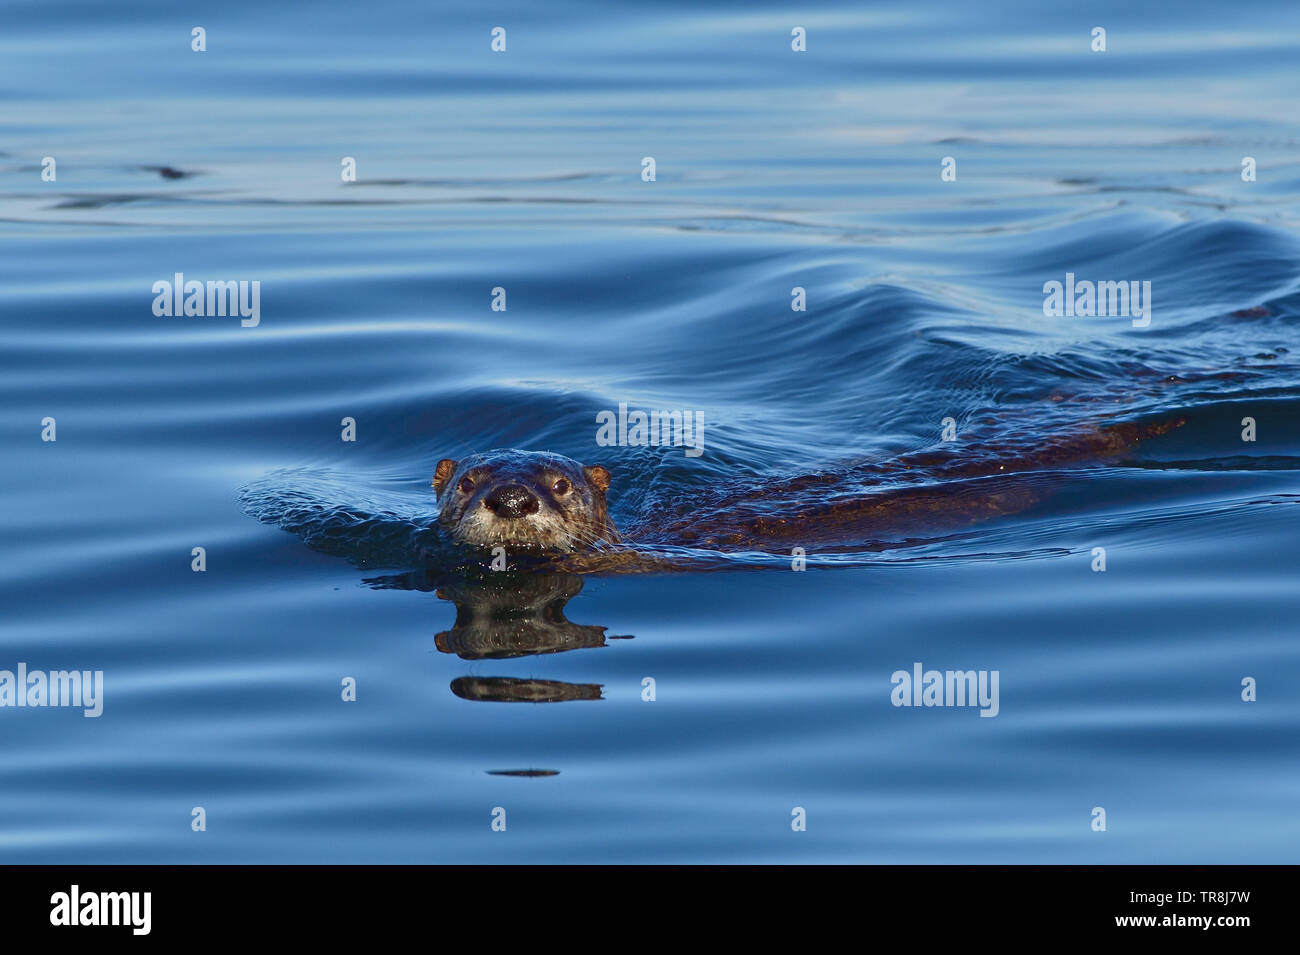 A river otter 'Lutra canadensis', swimming in the blue waters of the Stewart Channel off the coast of Vancouver Island British Columbia Canada Stock Photo